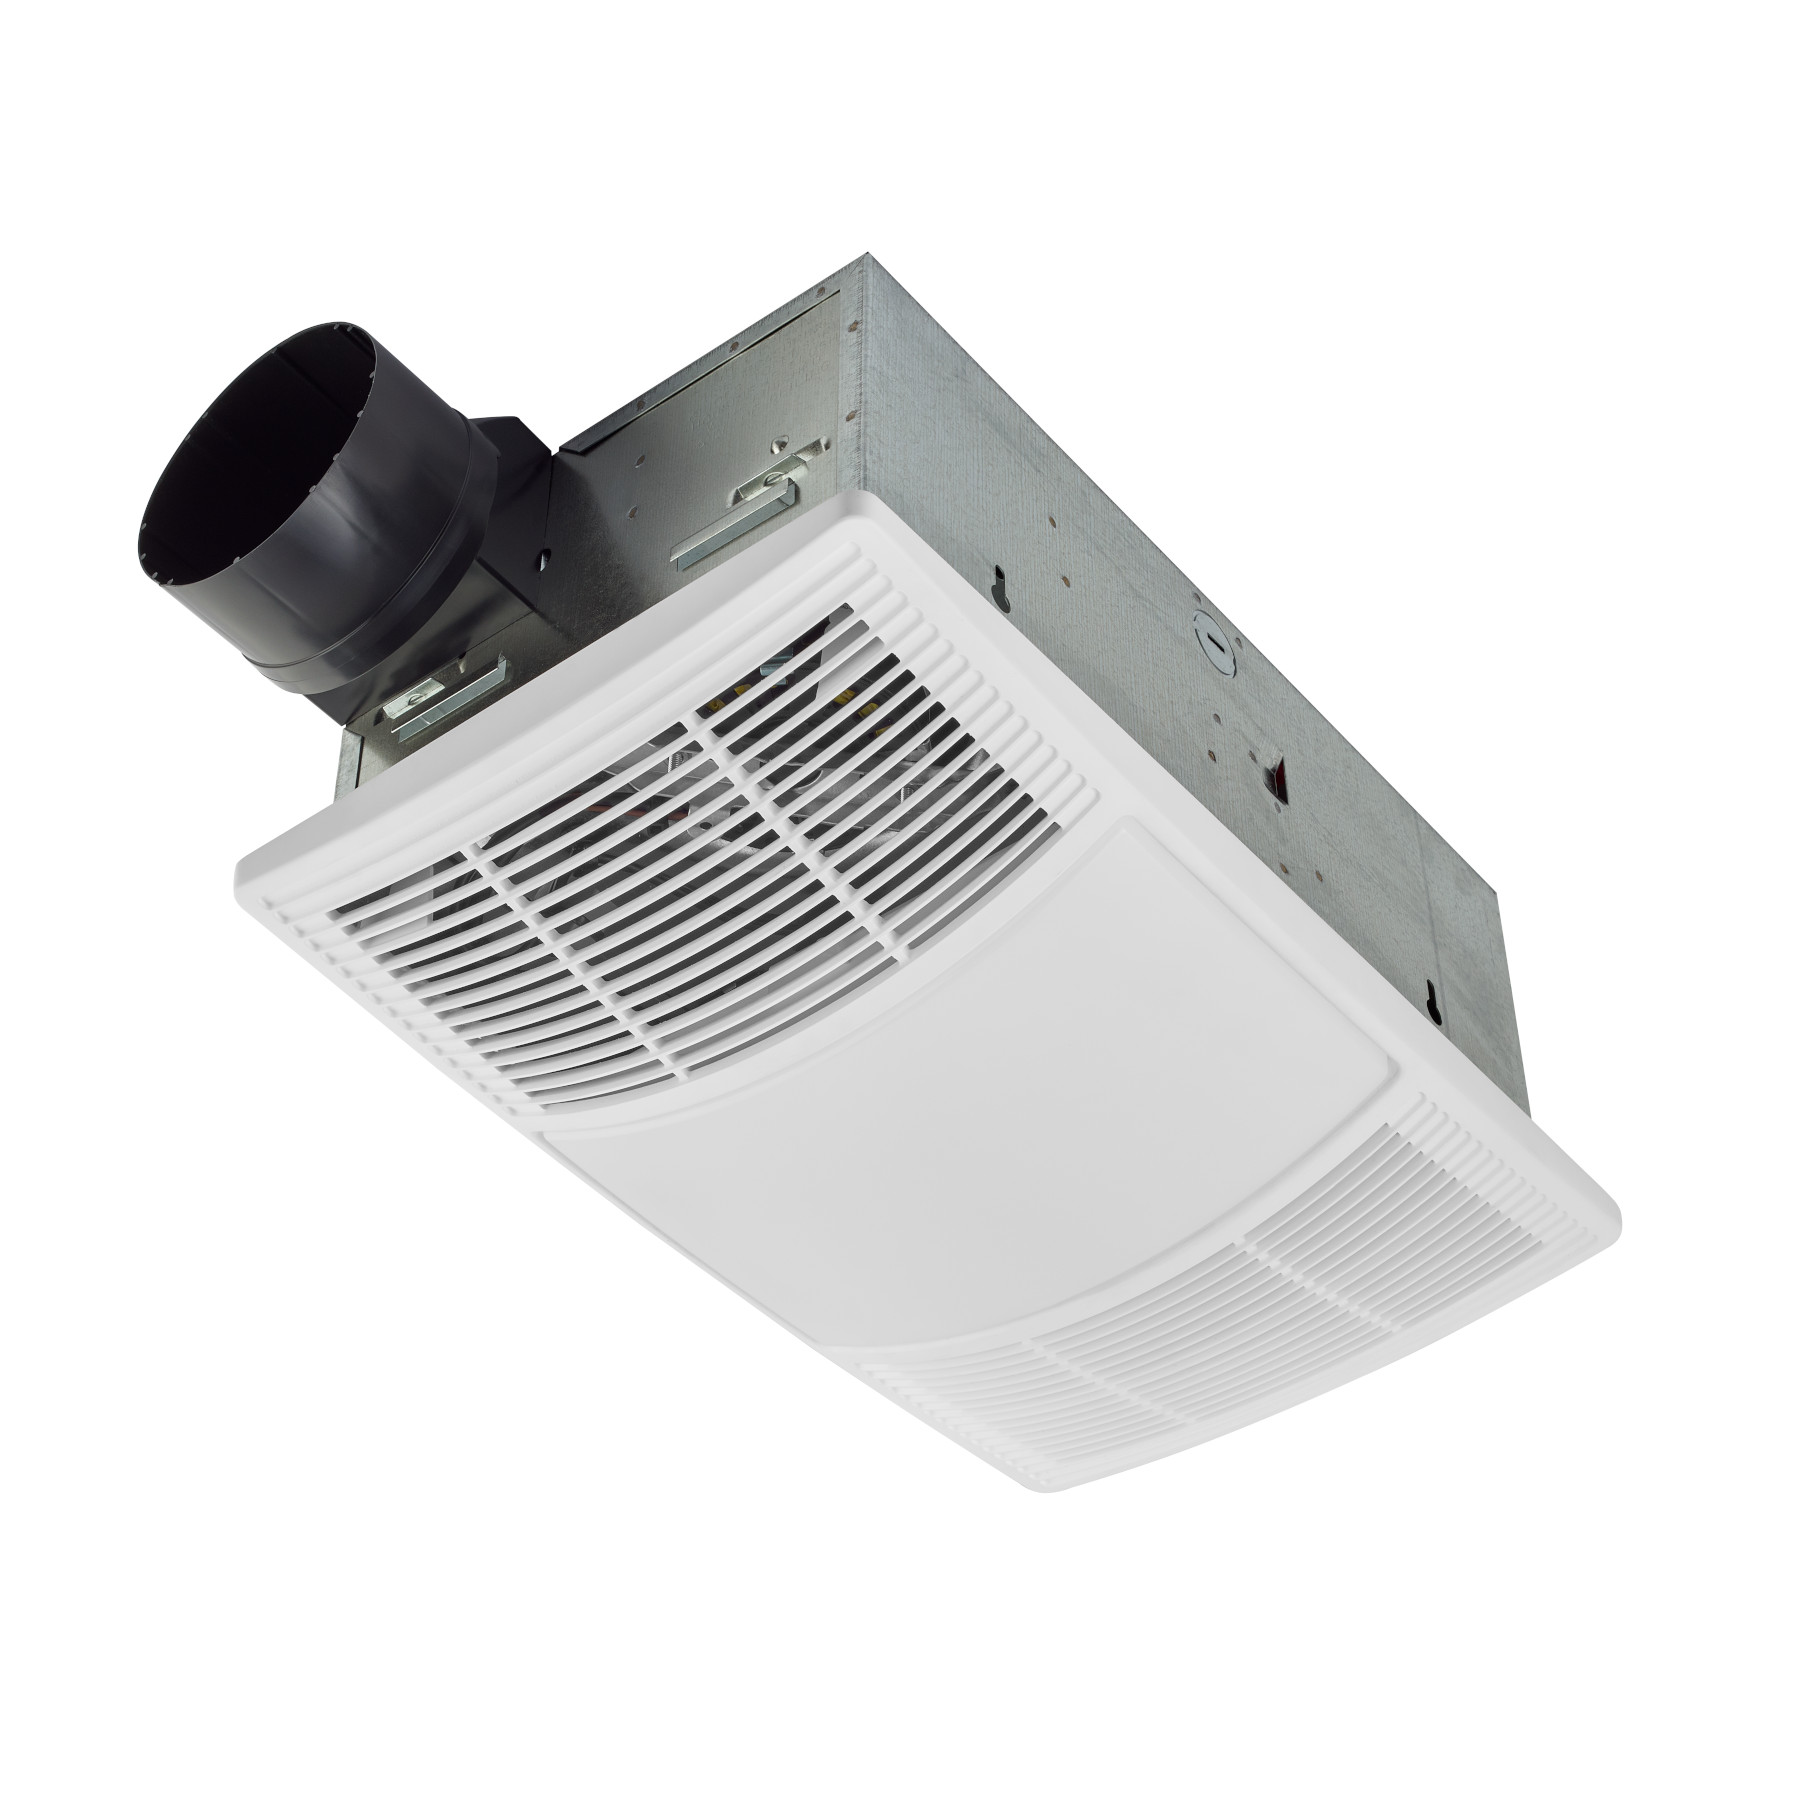 Bath And Exhaust Ventilation Fans With, Broan 100hfl Bathroom Fan Heater Light